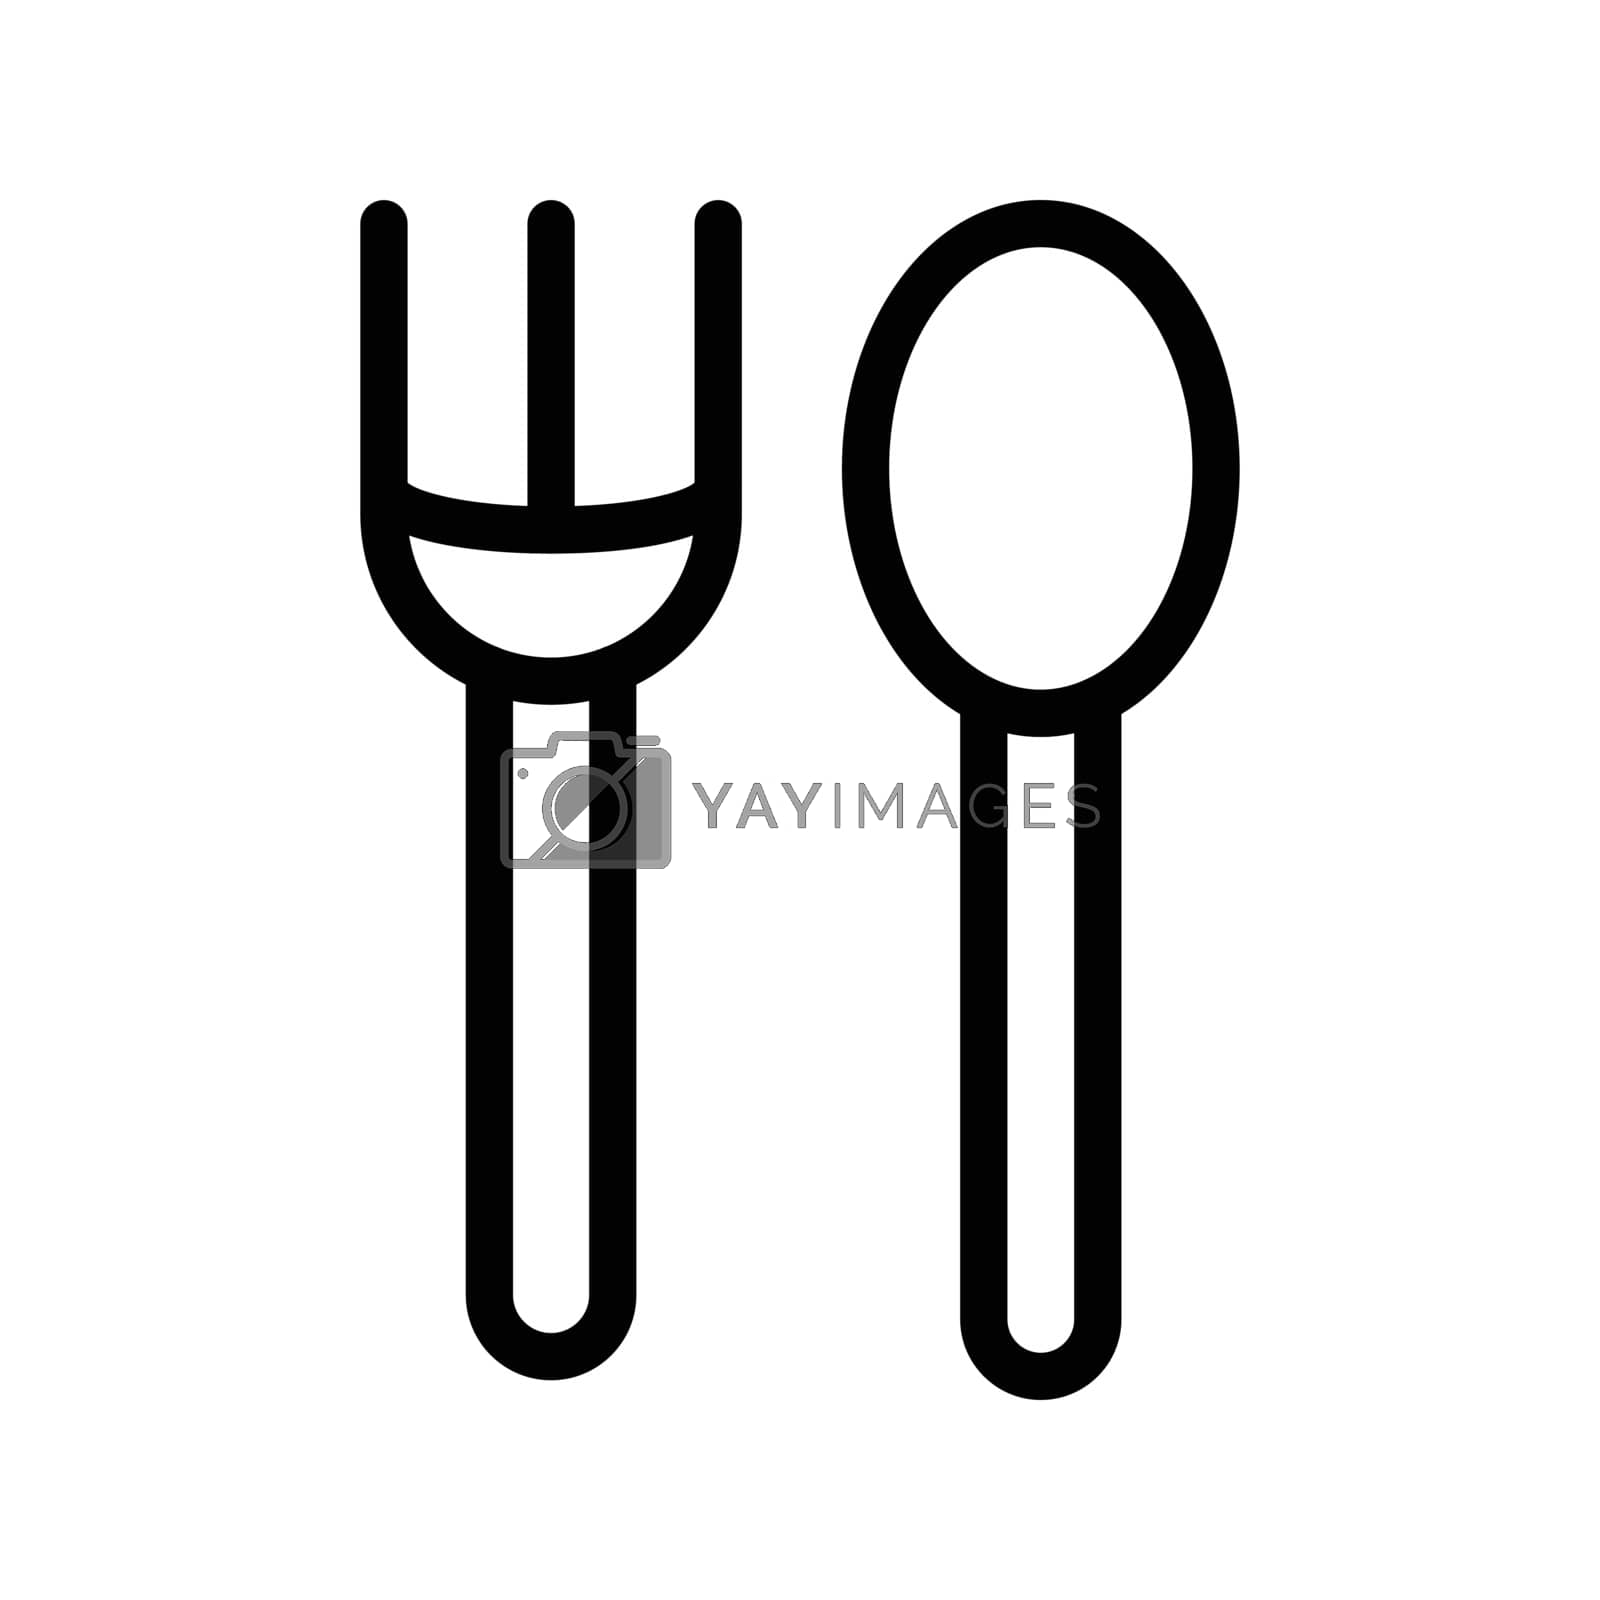 Royalty free image of fork by vectorstall